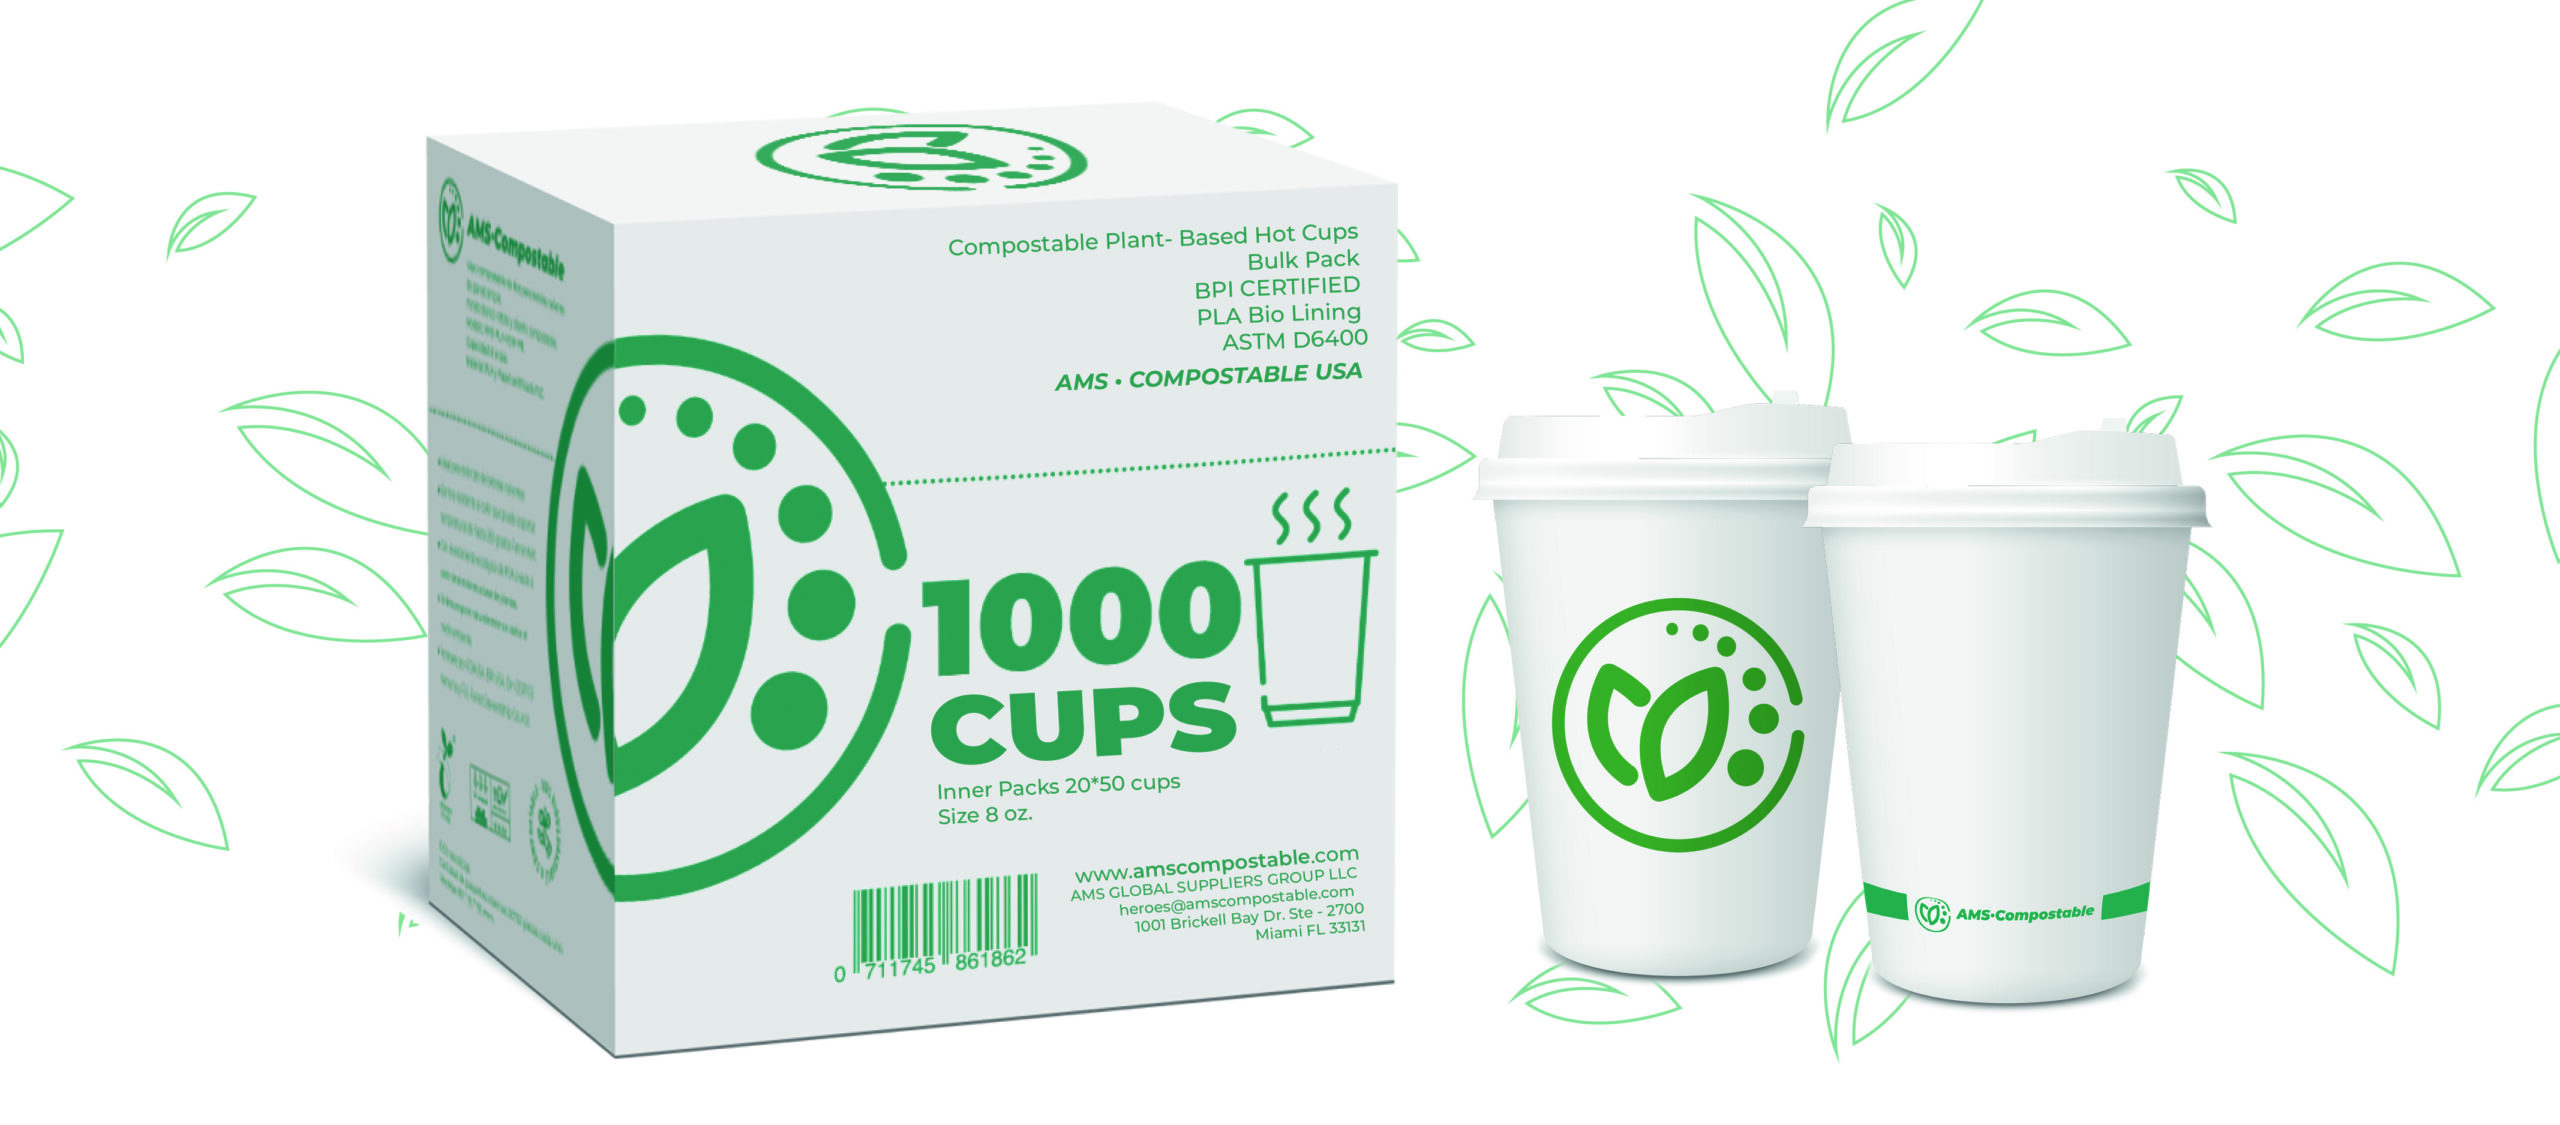 Compostable hot cups